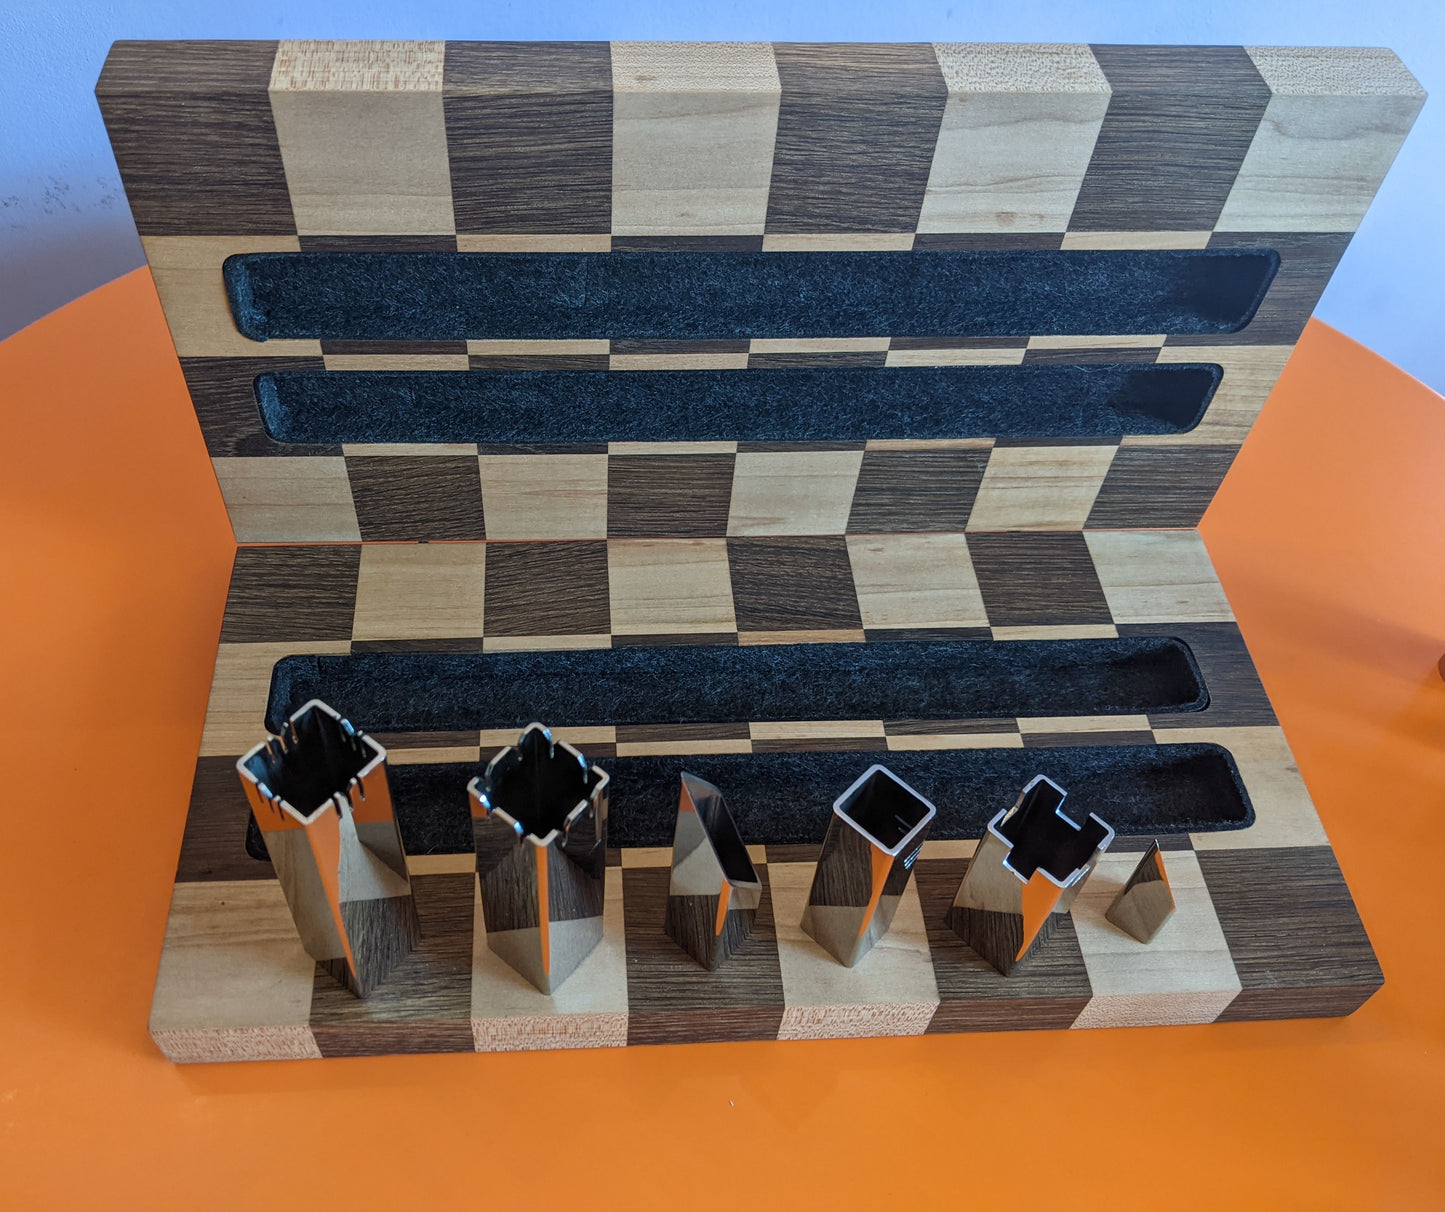 Foldable Stainless Steel Chess Set with Wooden Chessboard/box. Handmade.